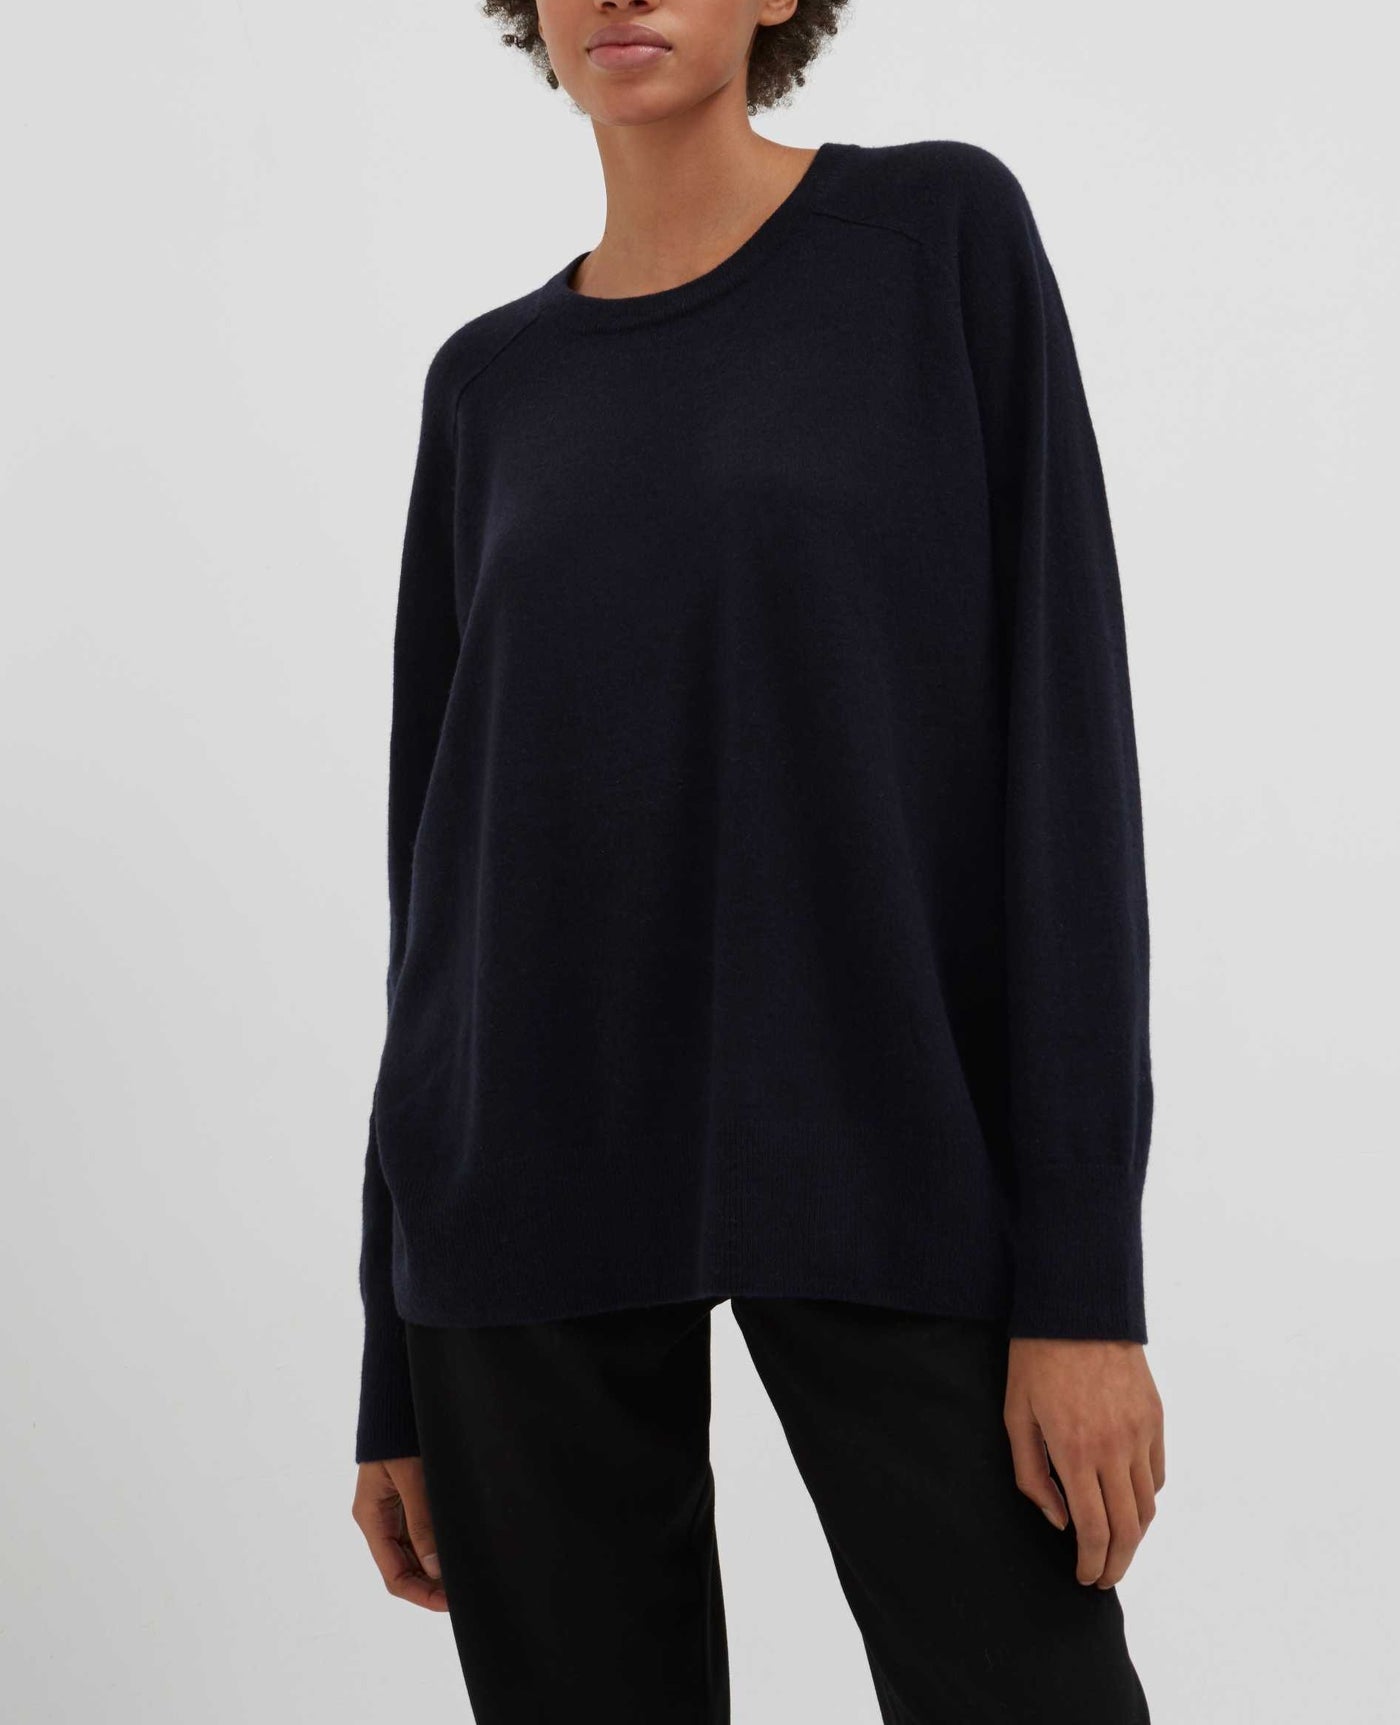 Navy Cashmere Slouchy Sweater